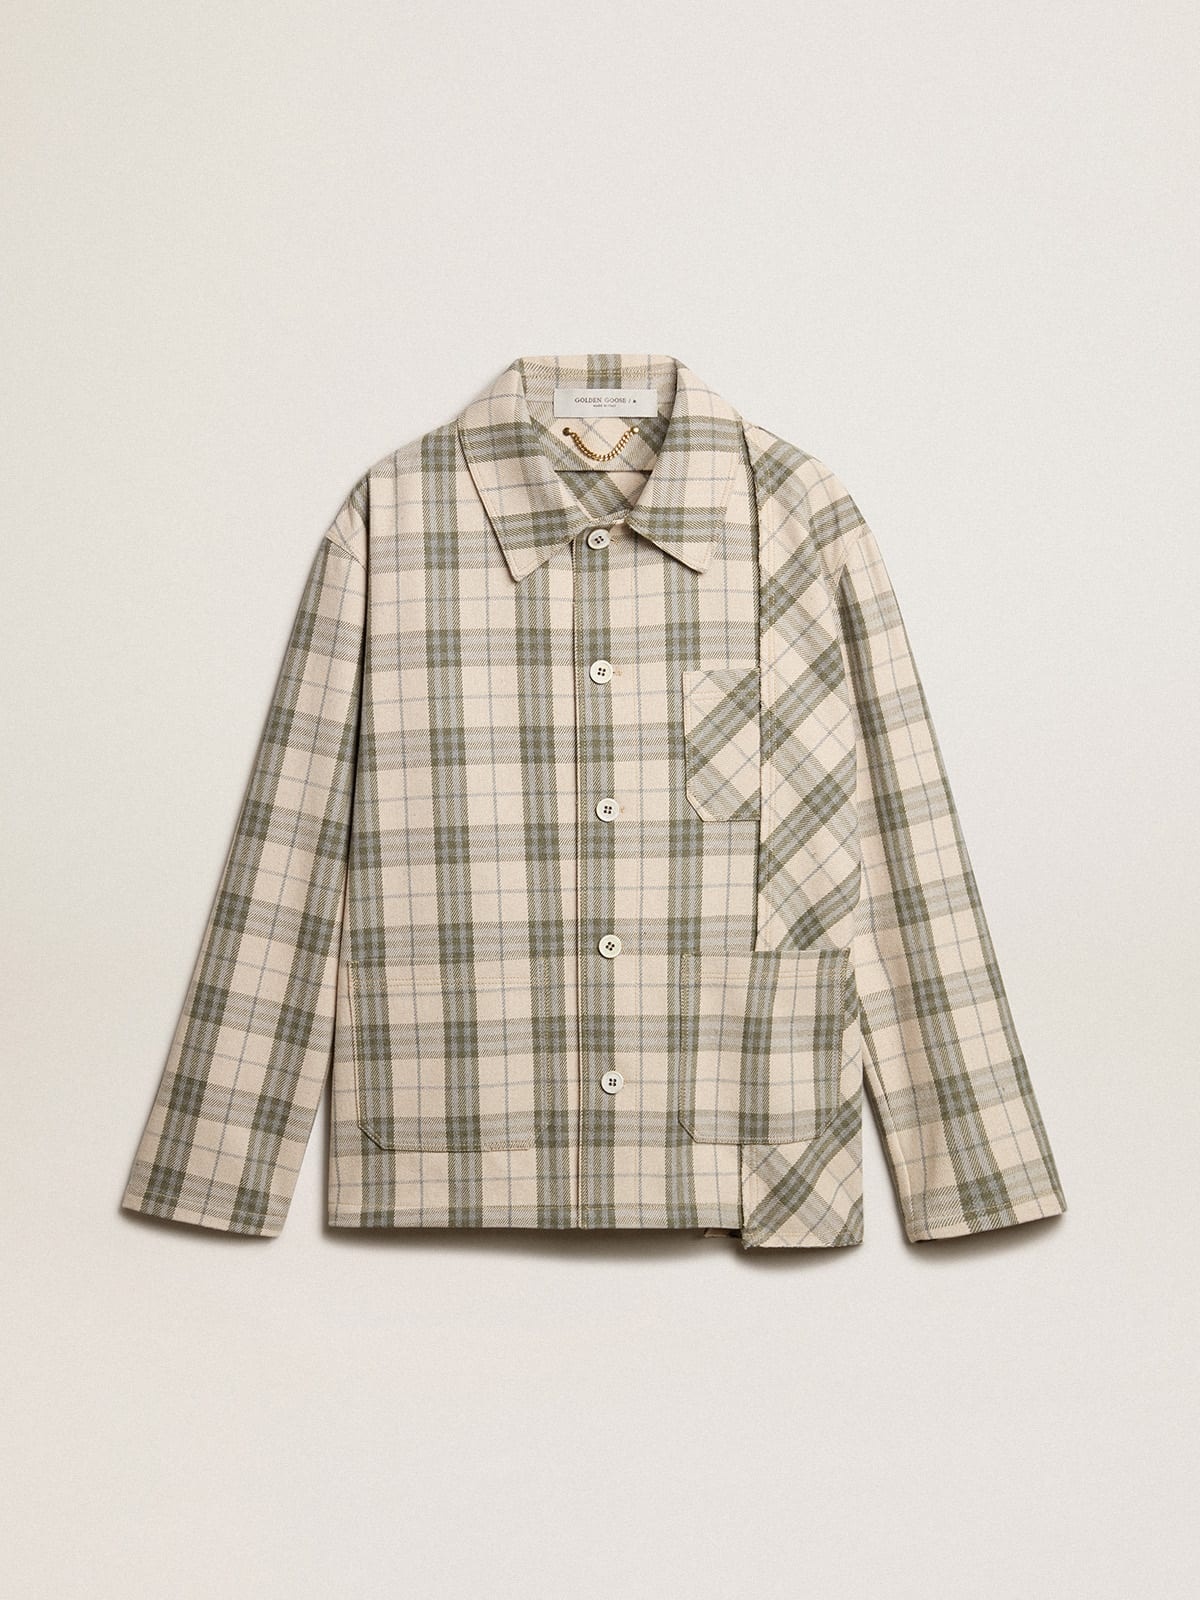 Men's slim-fit shirt made of ecru and green cotton flannel - 1